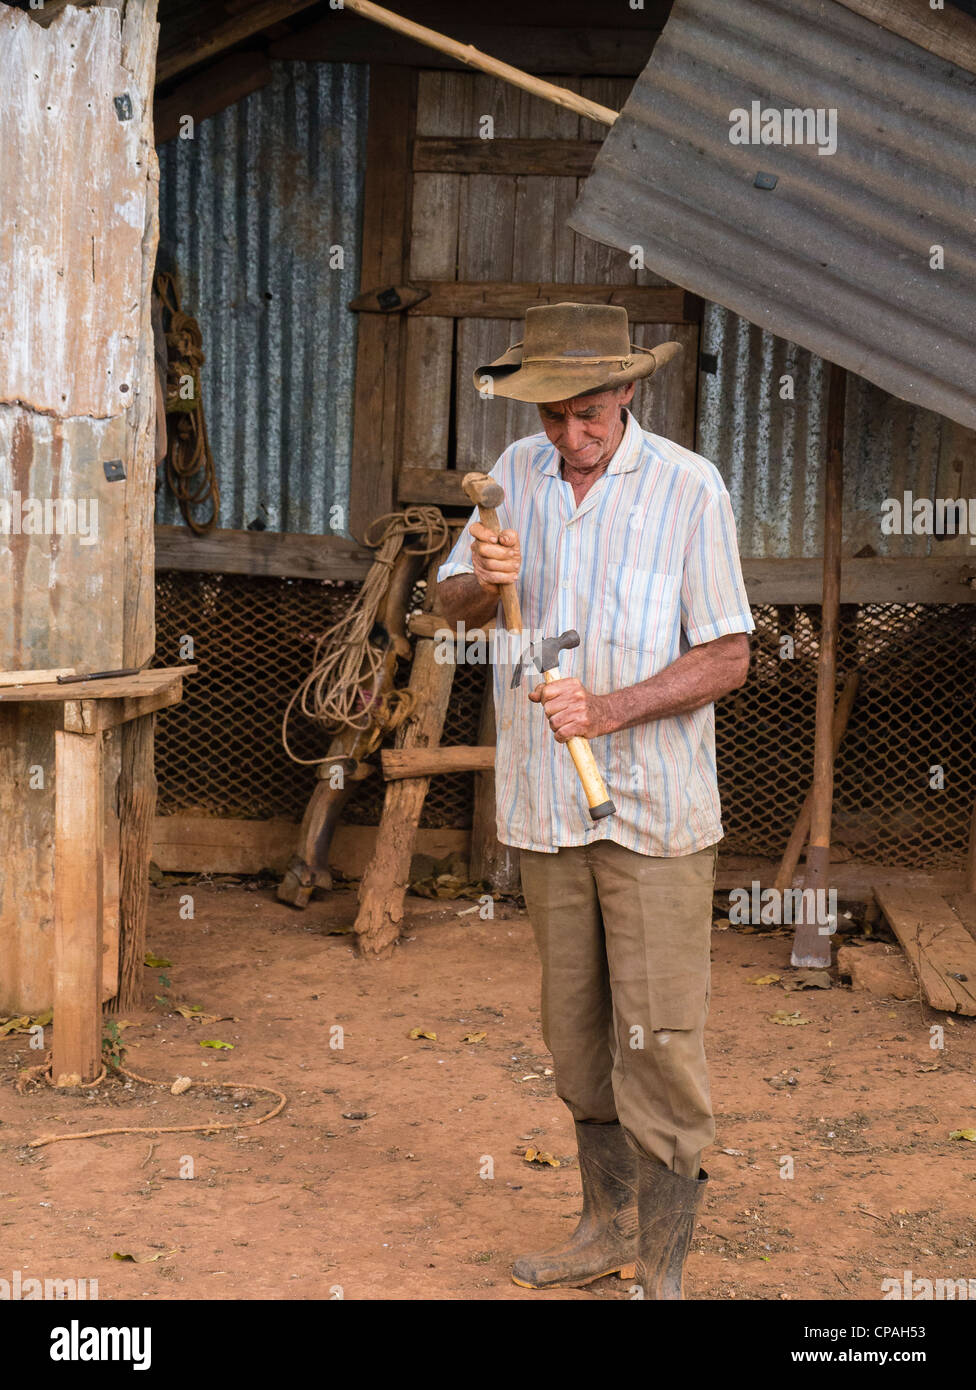 A 70-80 year old male Cuban tobacco farmer works with his tools by his shed in Viñales, Cuba in western Cuba. Stock Photo